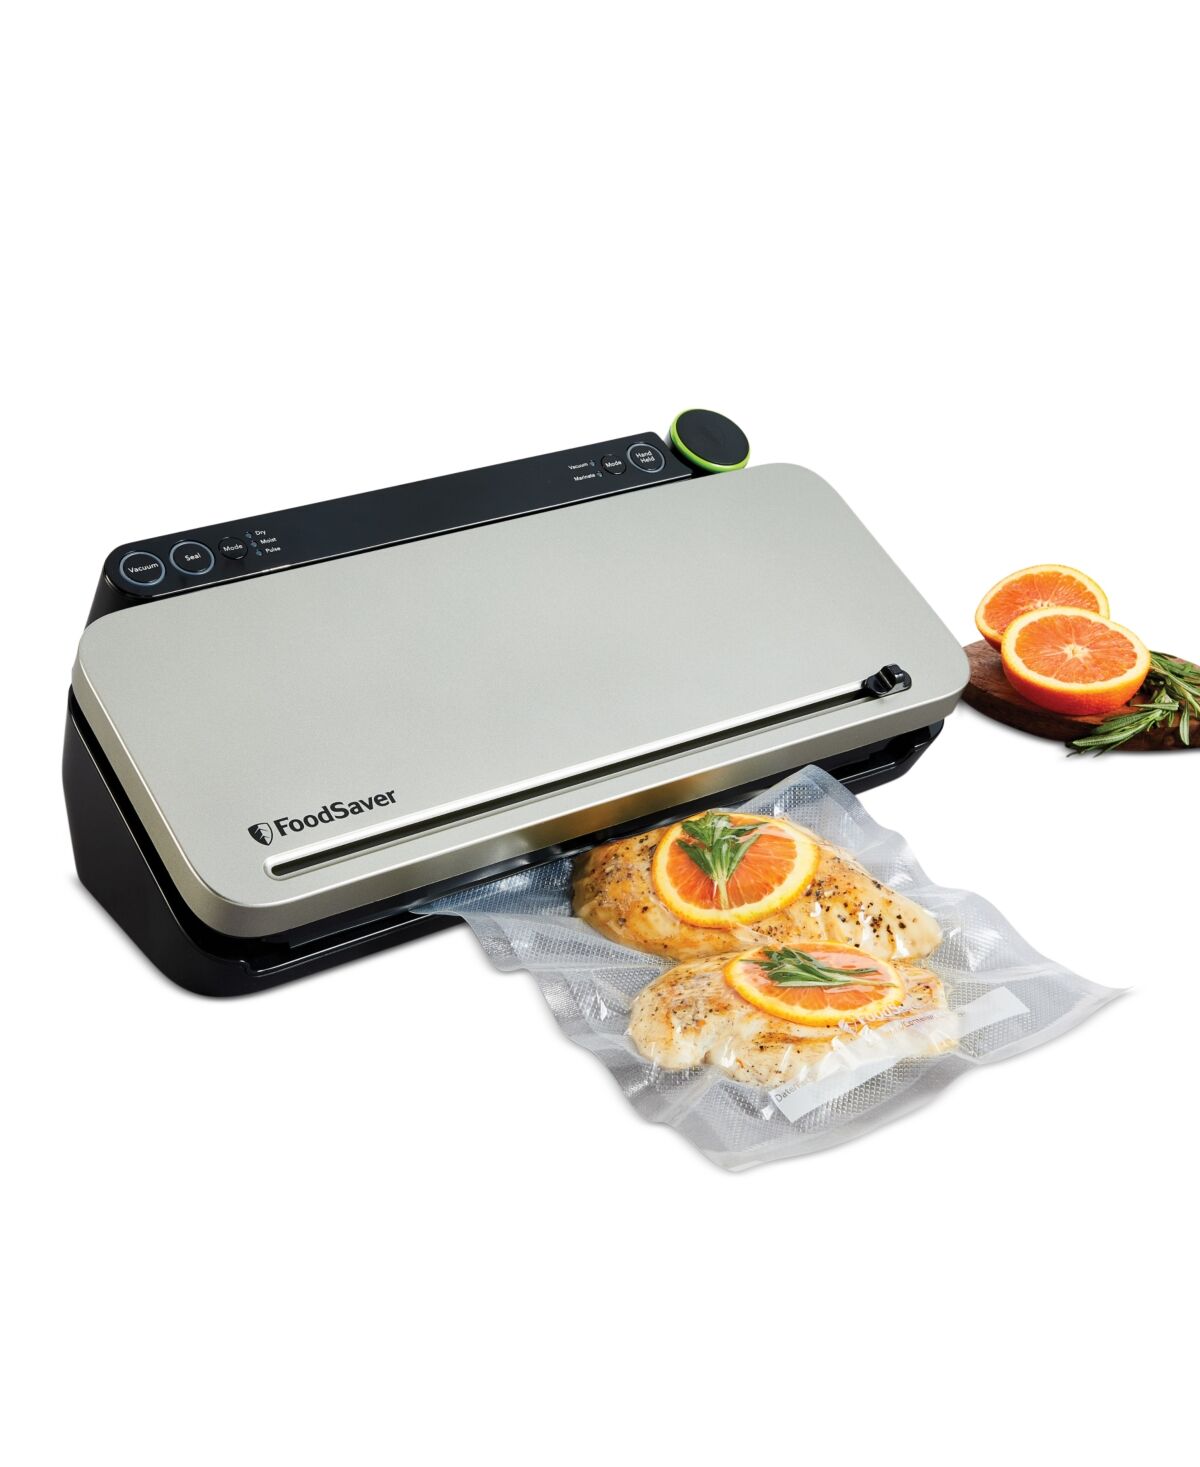 FoodSaver Multi-Use Vacuum Sealing Food Preservation System - Charcoal Stainless Steel